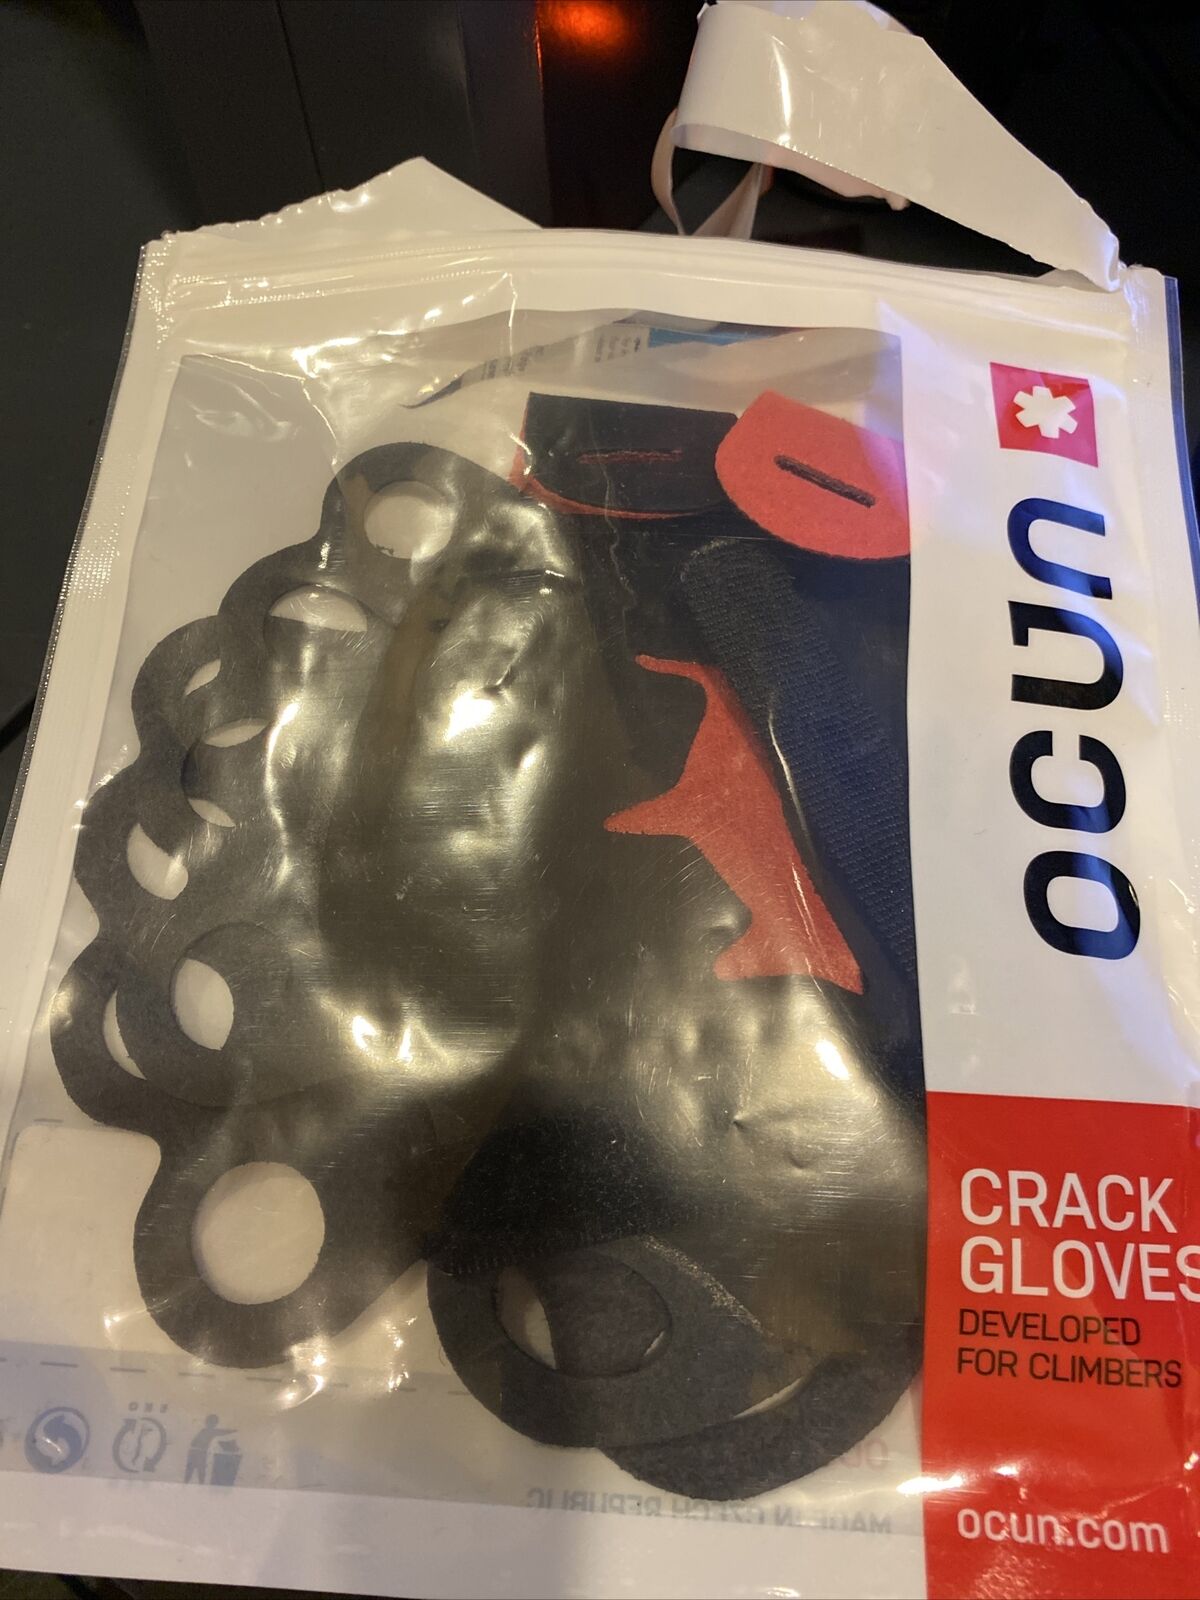 Nip Ocun Crack Gloves - Size Small Opened Package. Never Used